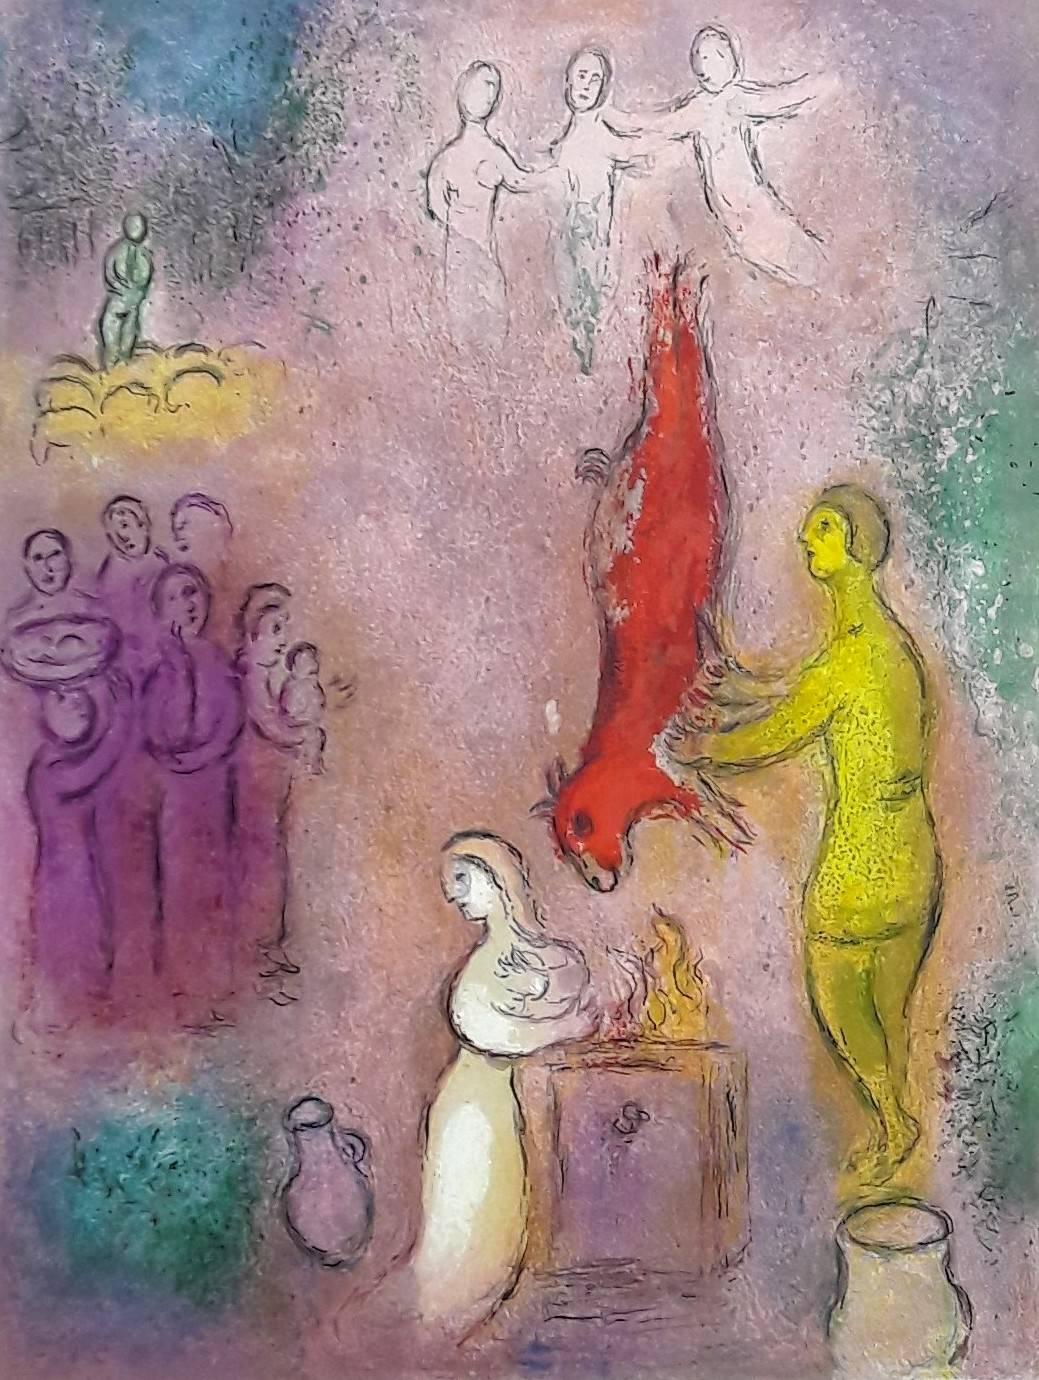 Marc Chagall Figurative Print - Sacrifices Made To The Nymphs - Original Lithograph - 1961